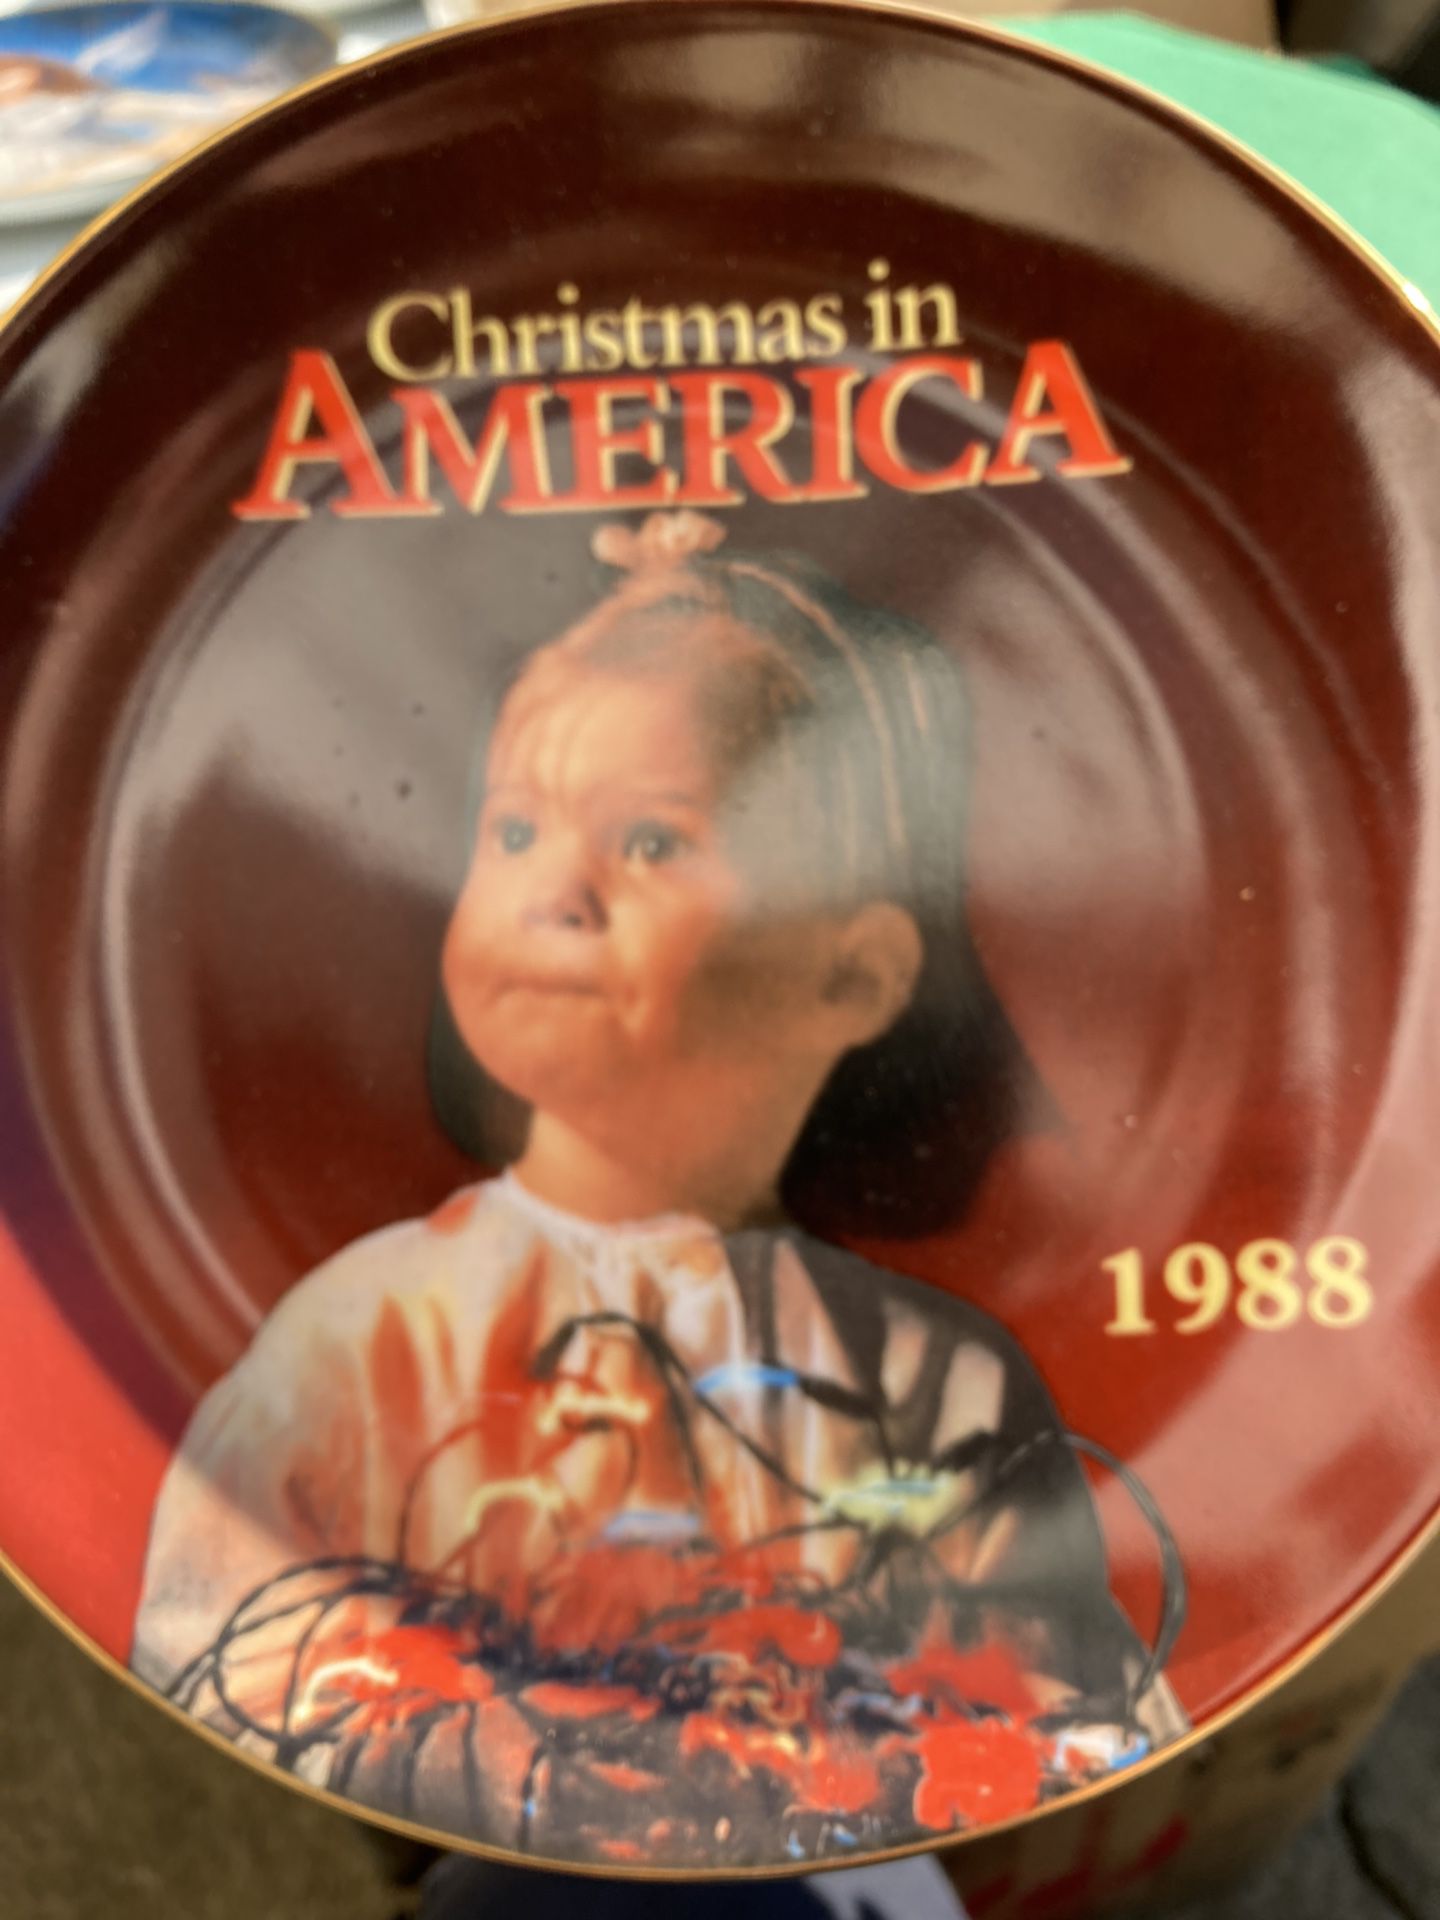 1988 Christmas in America collectors plate